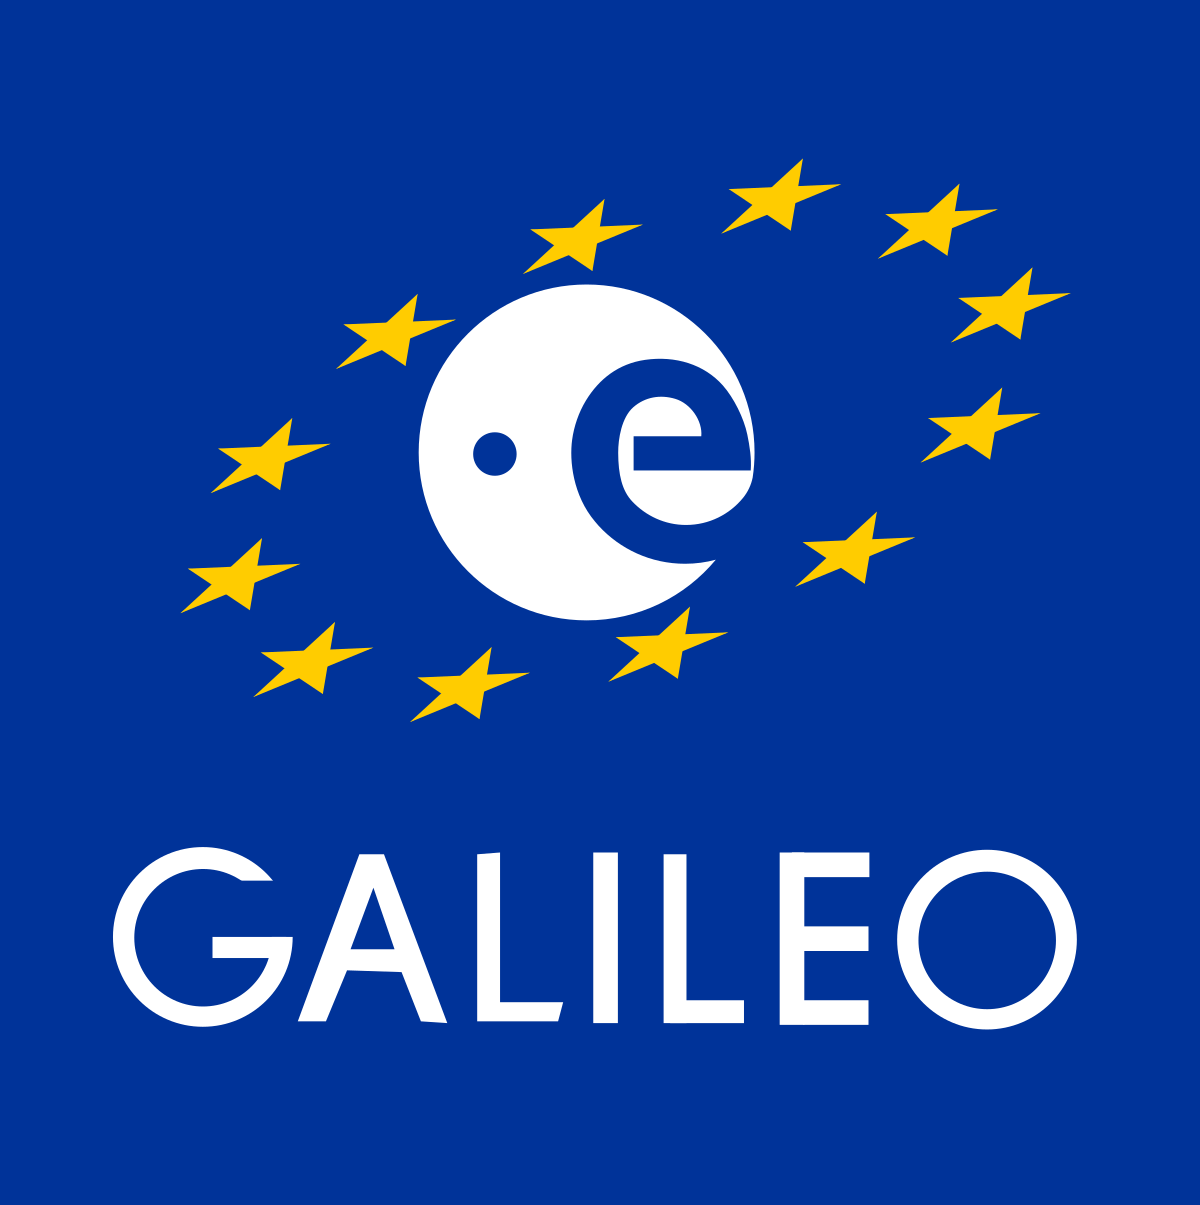 UK to lose full access to the EU Galileo sat-nav system